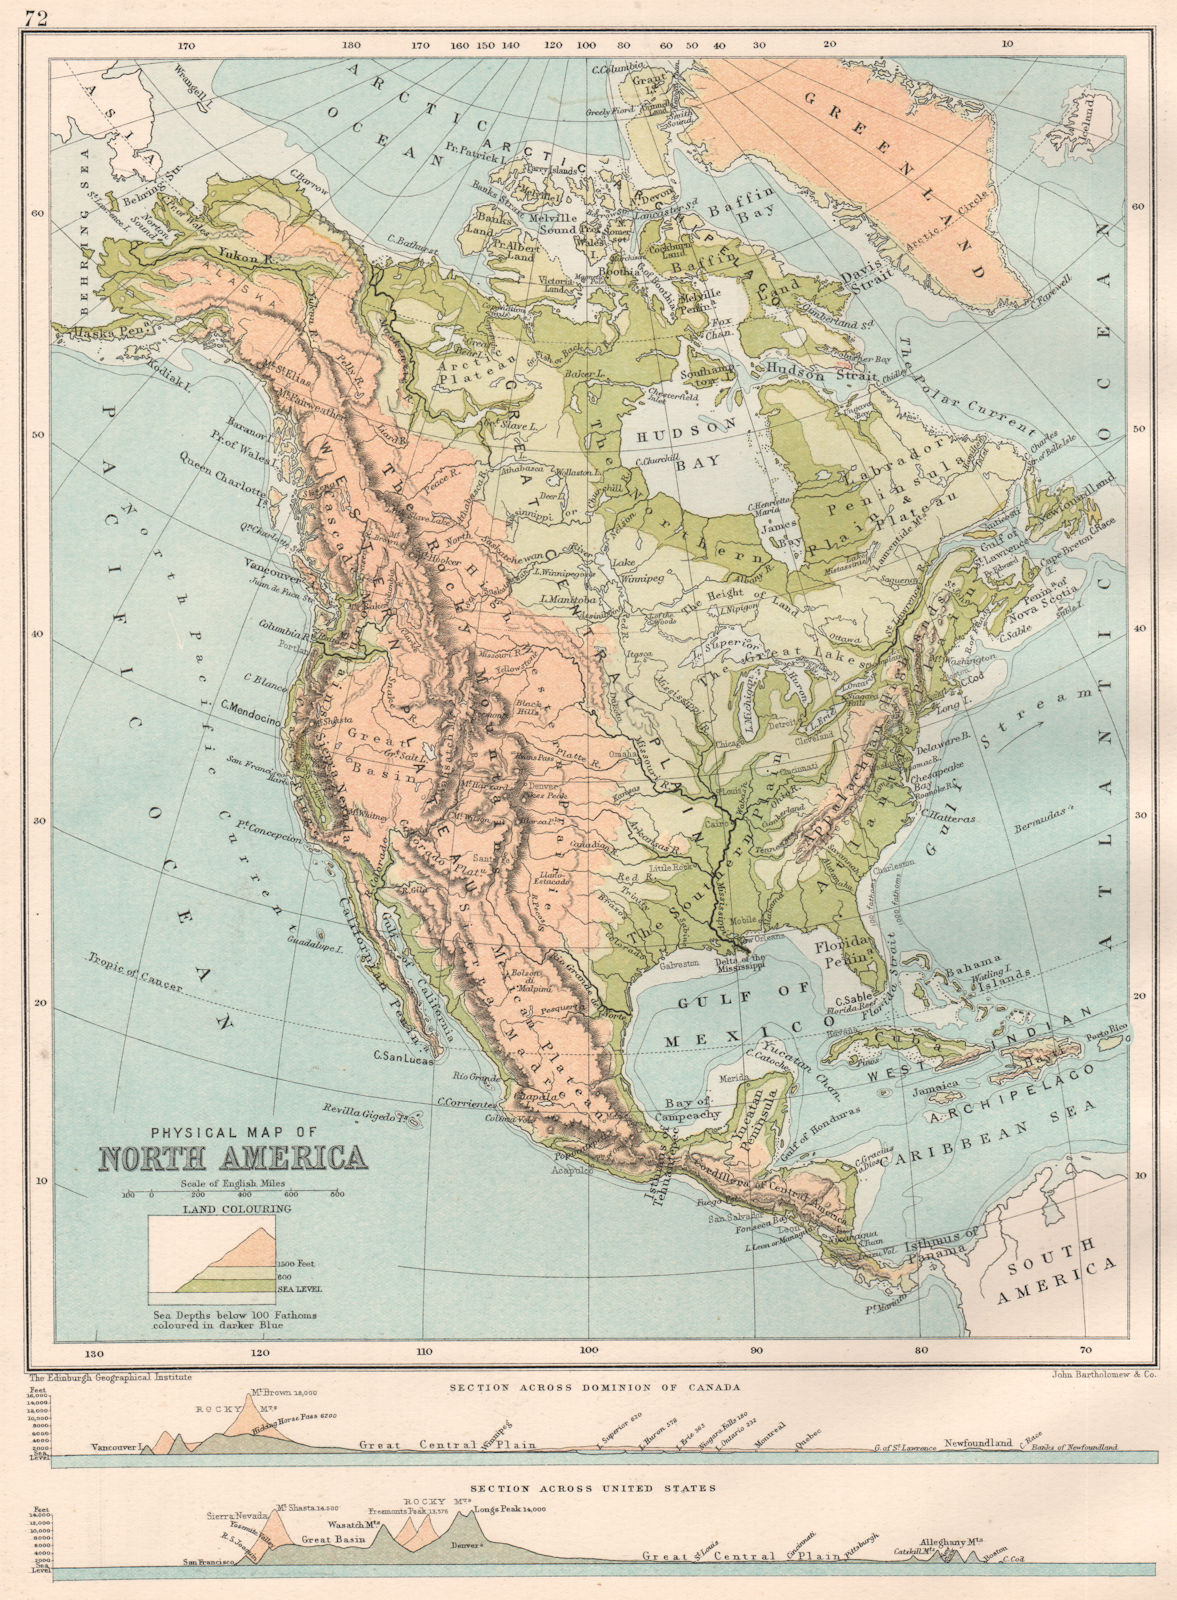 Associate Product NORTH AMERICA PHYSICAL. Sections across the United States & Canada 1891 map